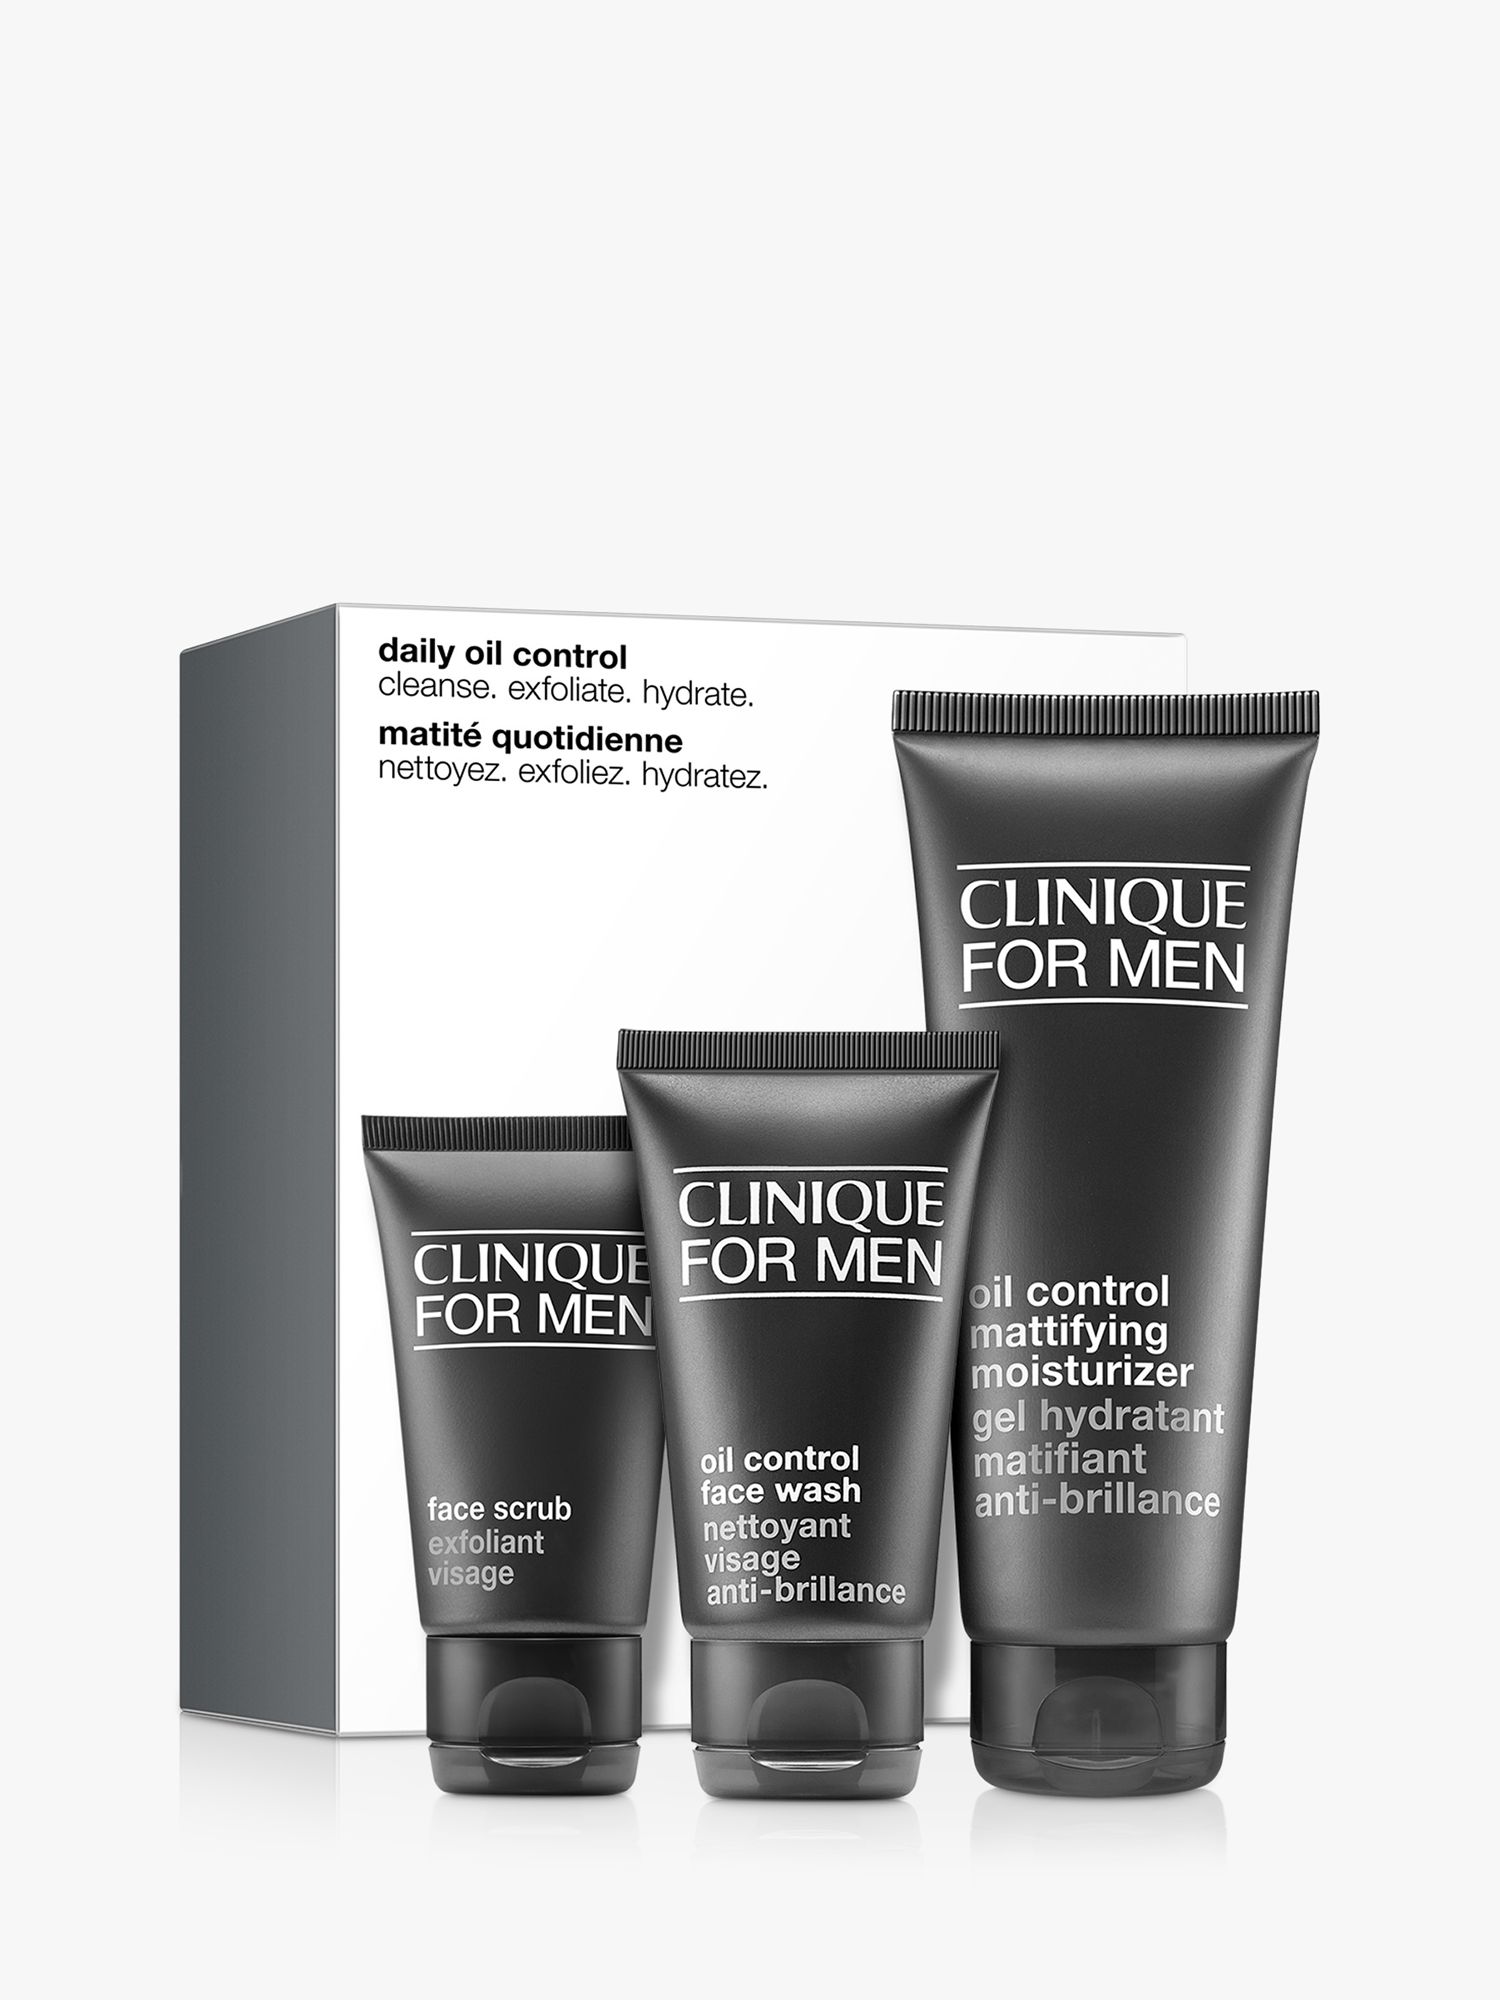 Clinique For Men Daily Oil Control Skincare Gift Set at John Lewis